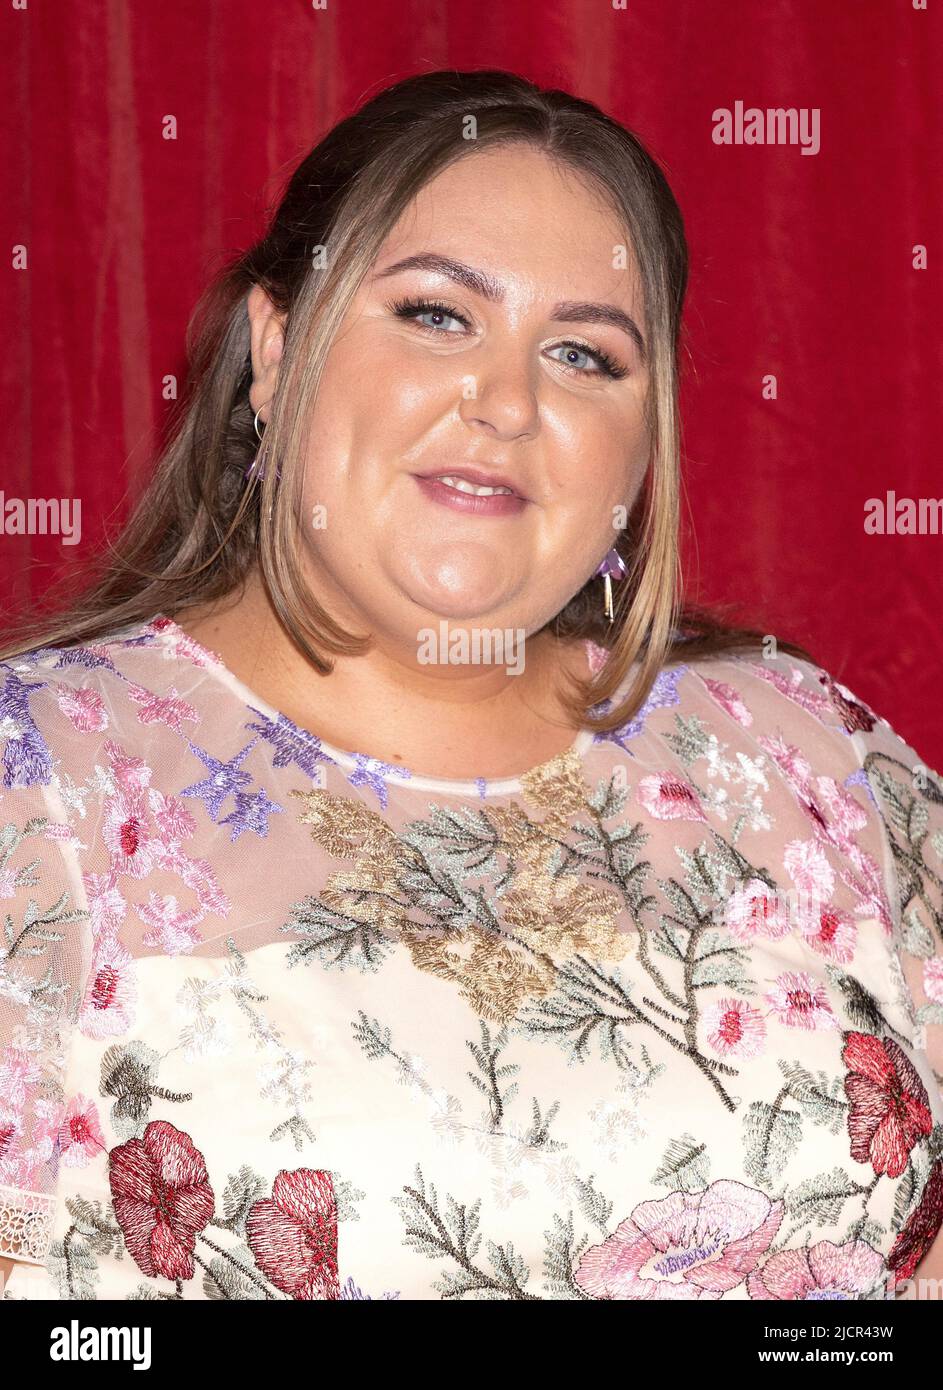 LONDON, UK. 11th June 2022. Claire Norris arriving for the British Soap Awards 2022 at the Hackney Empire in London, England.  CREDIT: S.A.M./ALamy Stock Photo